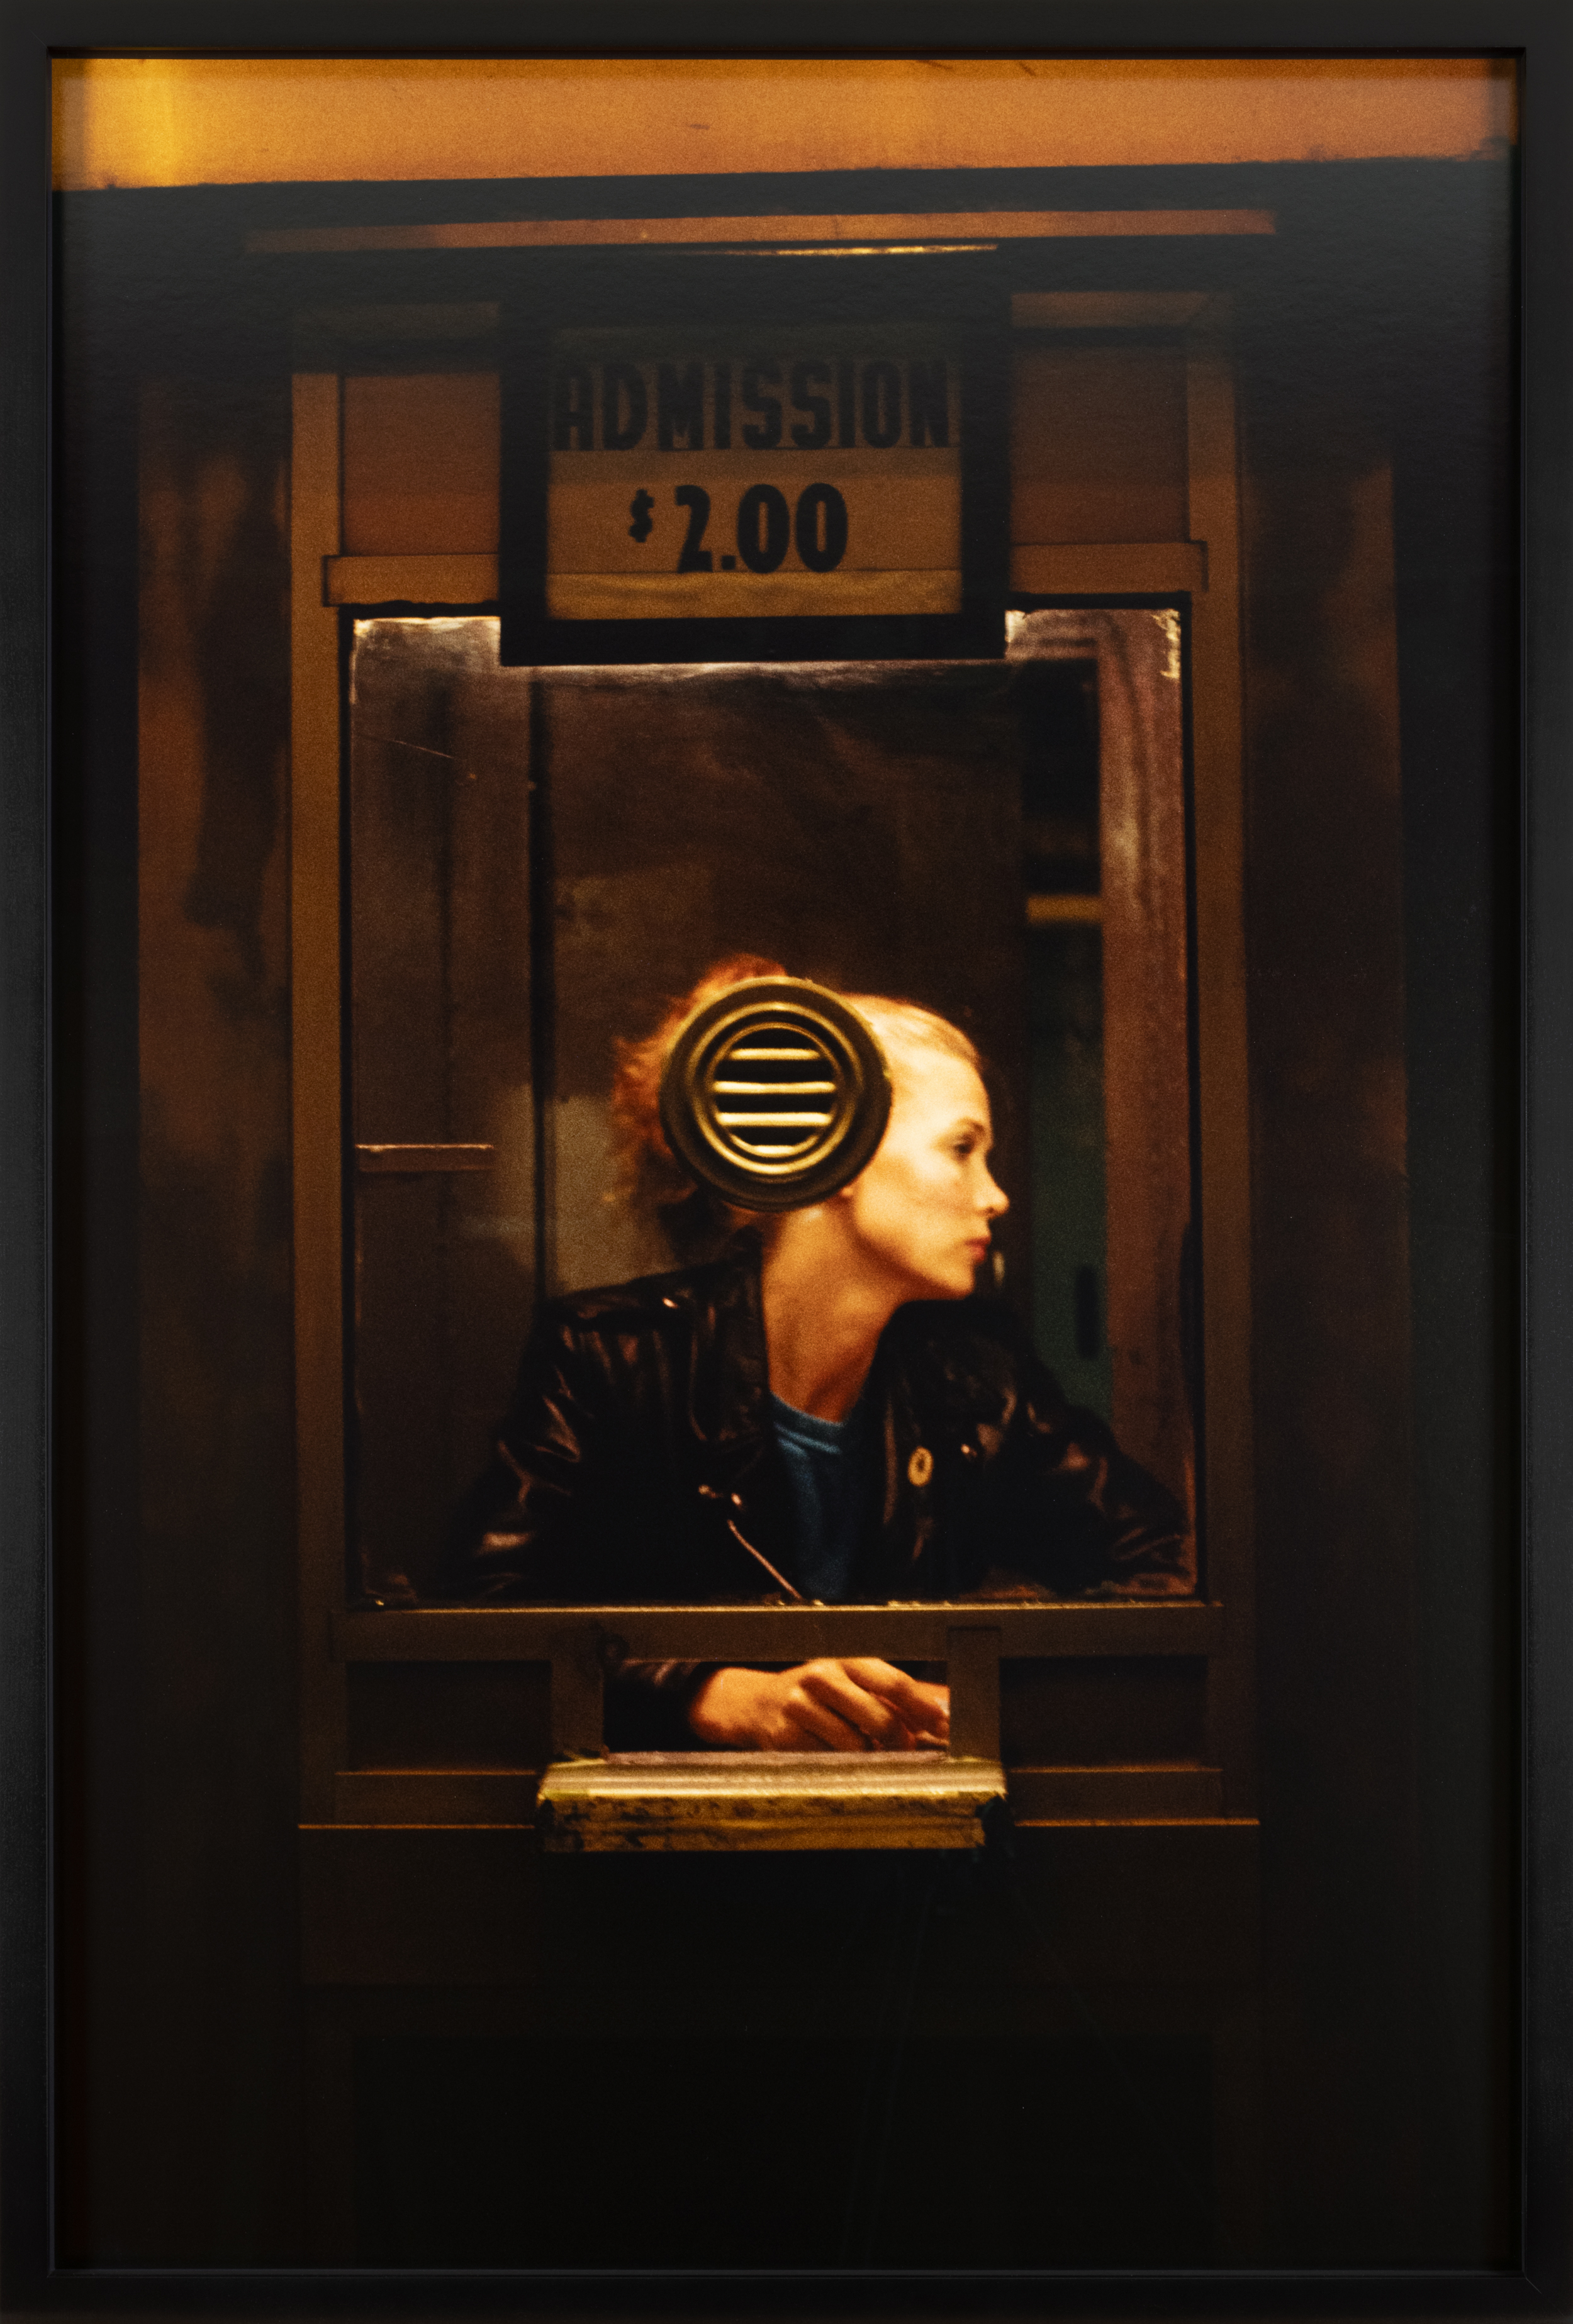 Color photograph of a silhouetted figure in a ticket booth framed in black